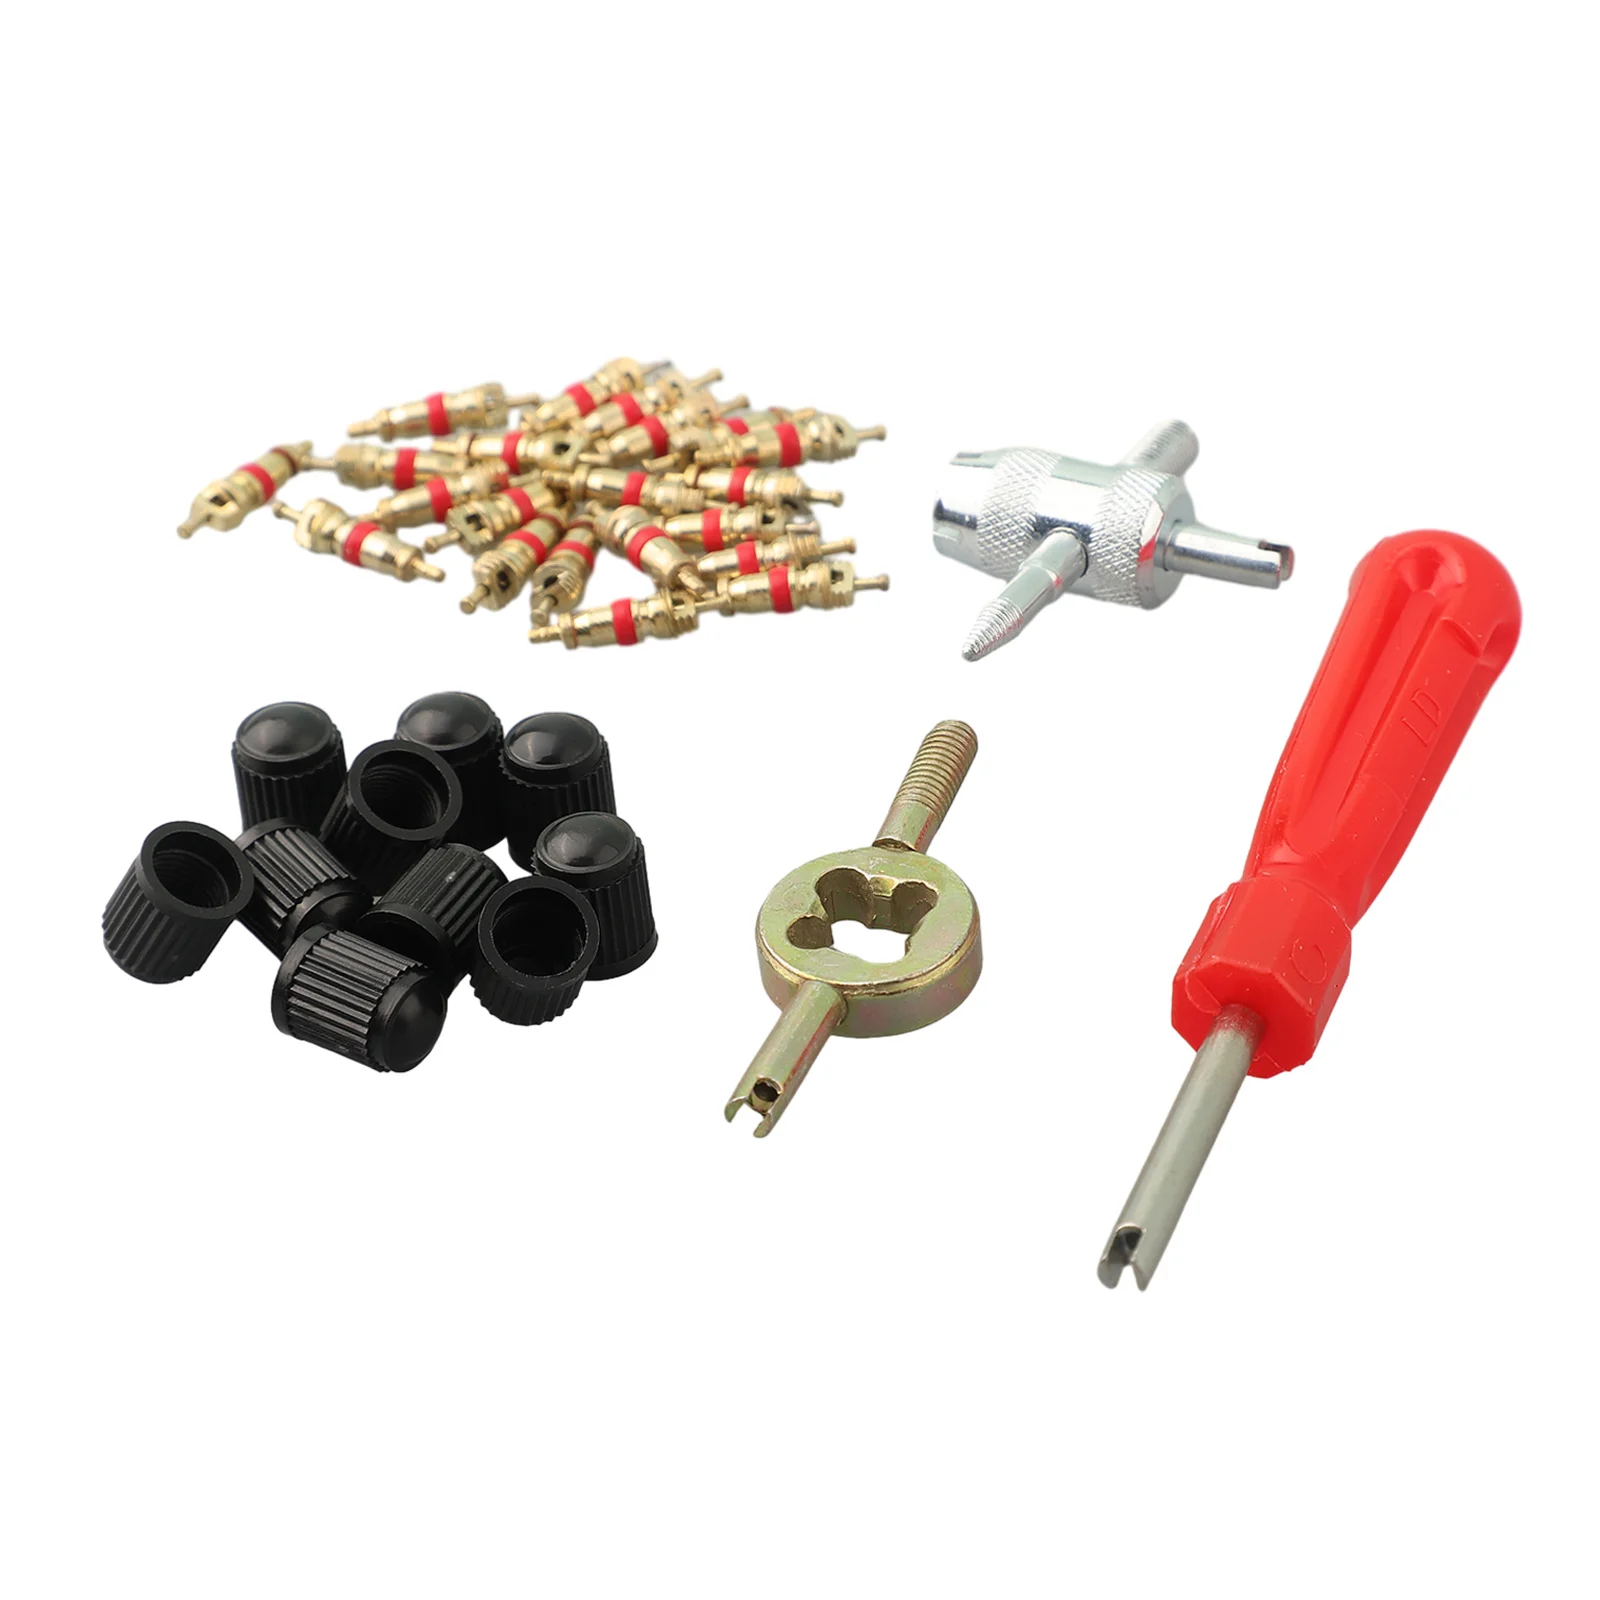 

Repair Install Tool Tire Repair Tool Trucks Motorcycles Tyre Inserts Valve Stems Removal Installation Remover Screwdriver None